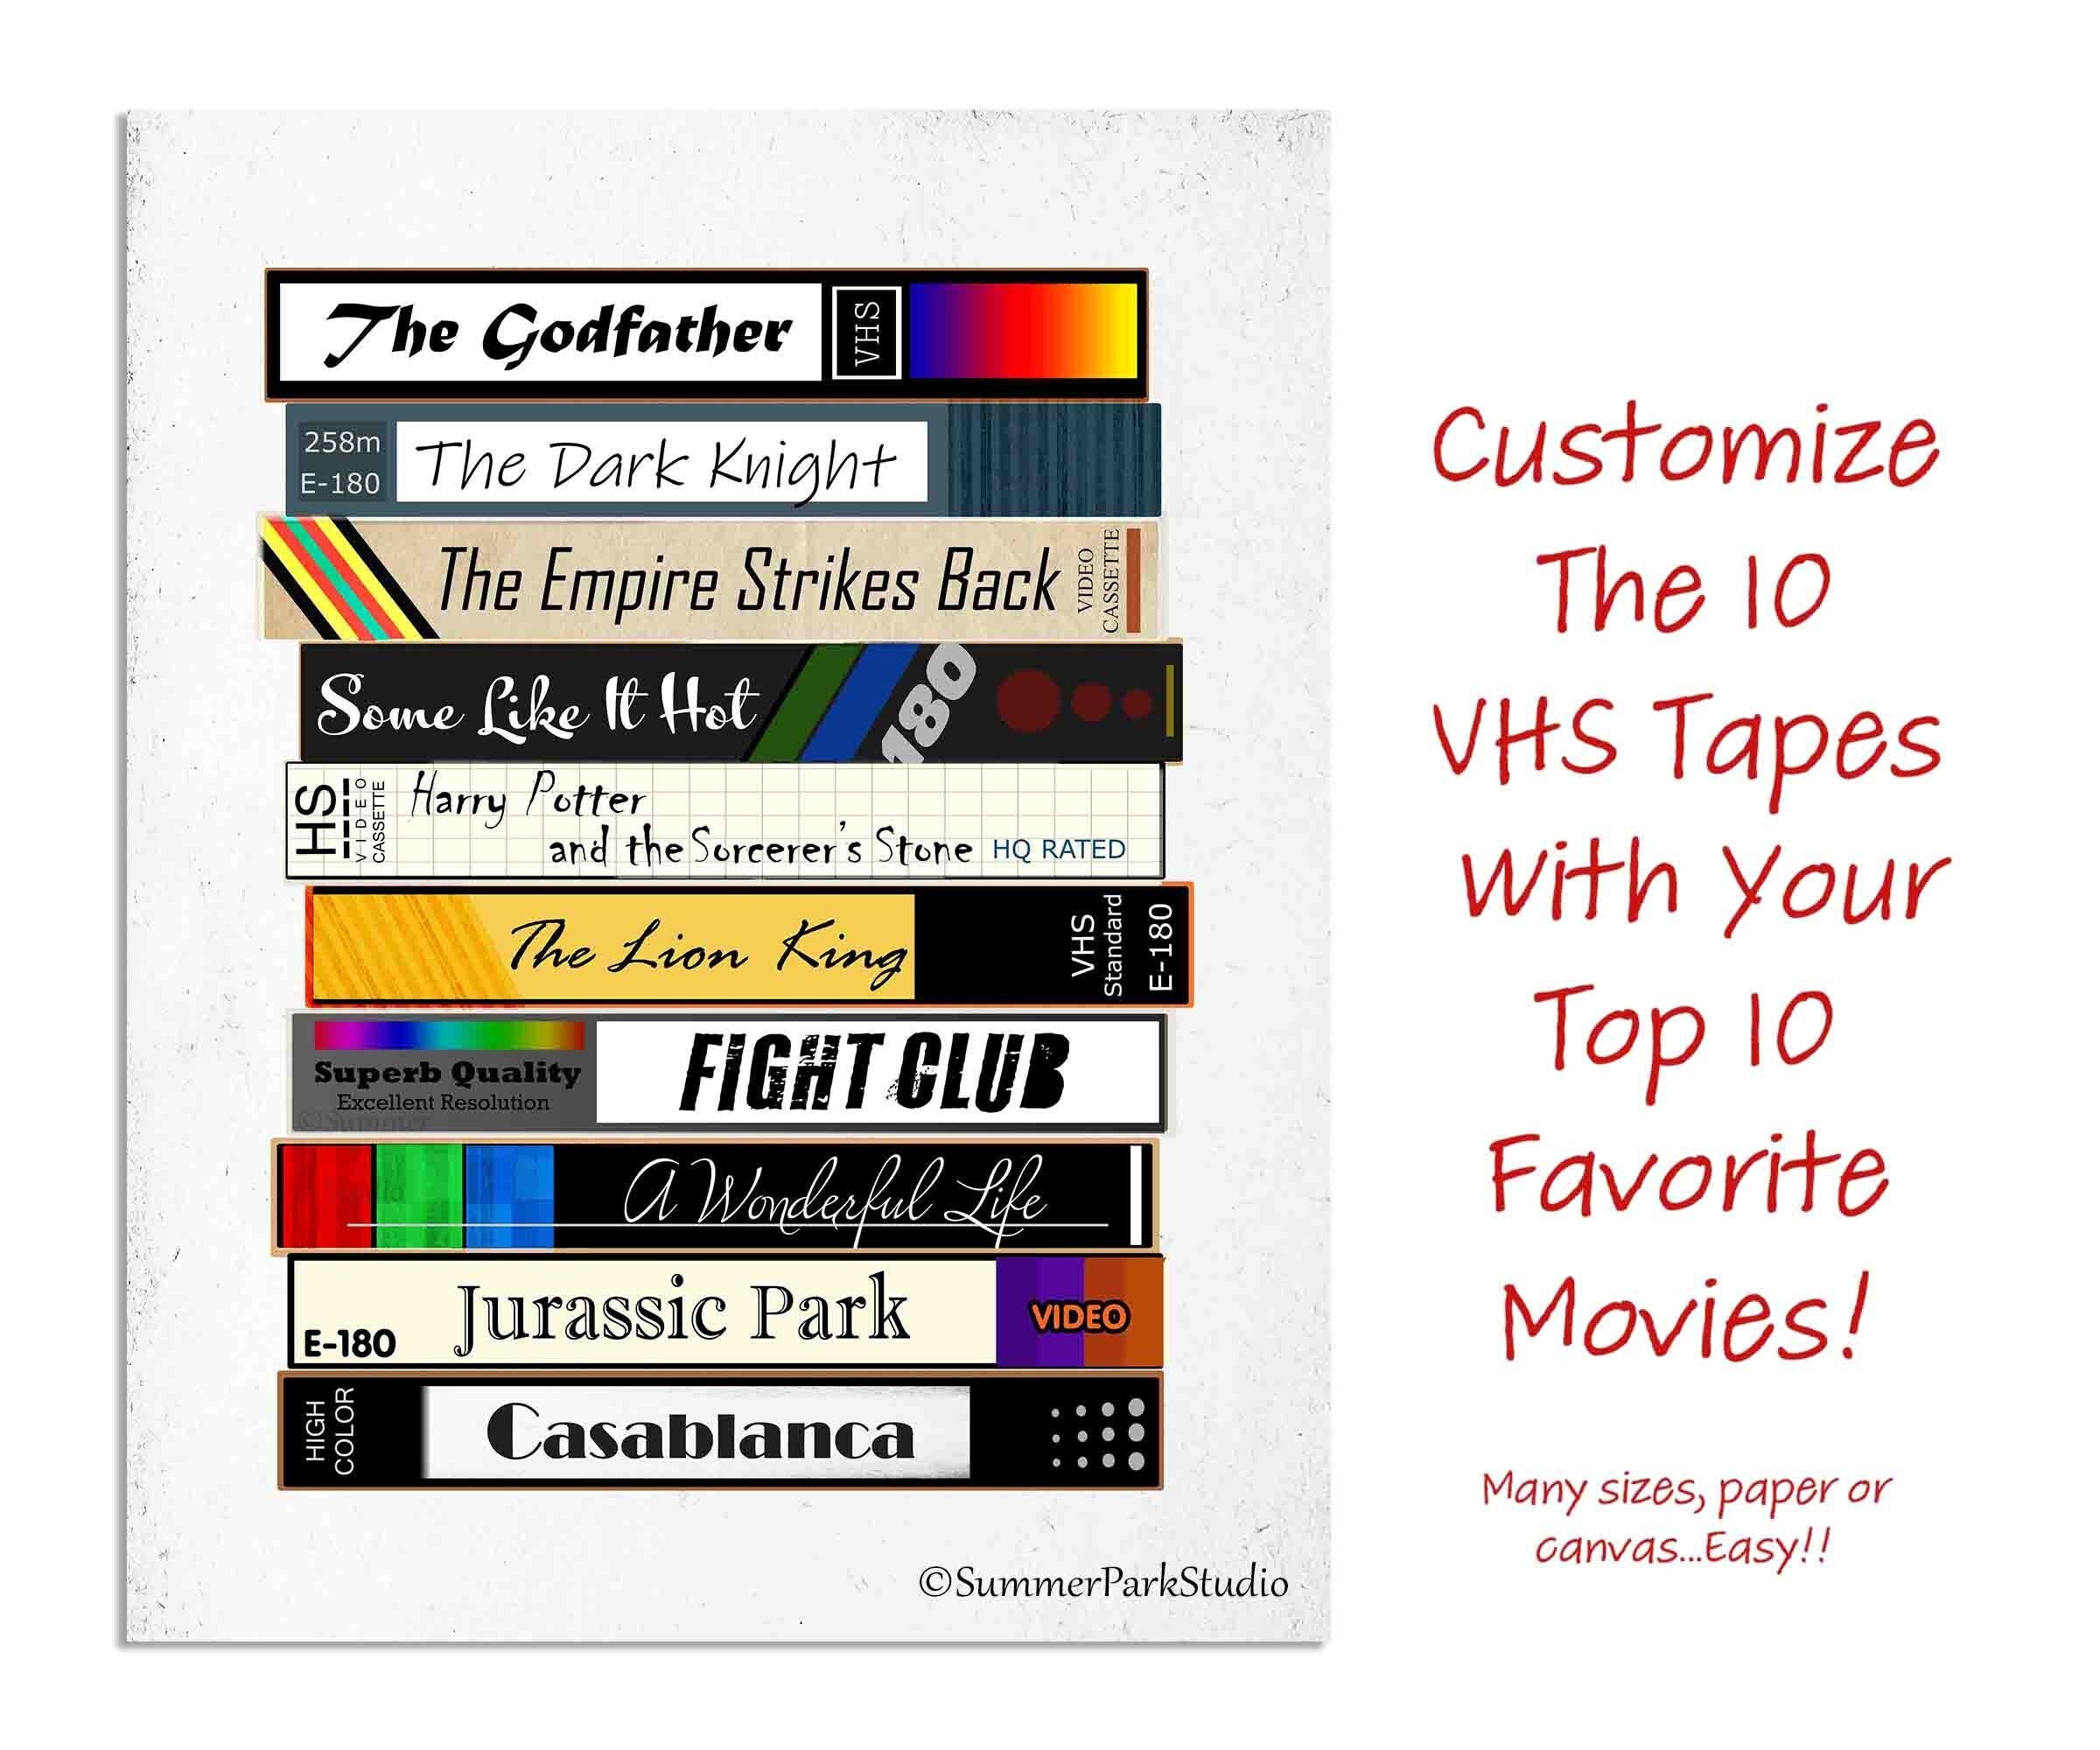 Custom VHS Tapes Art Print Your Top 10 Favorite Movies